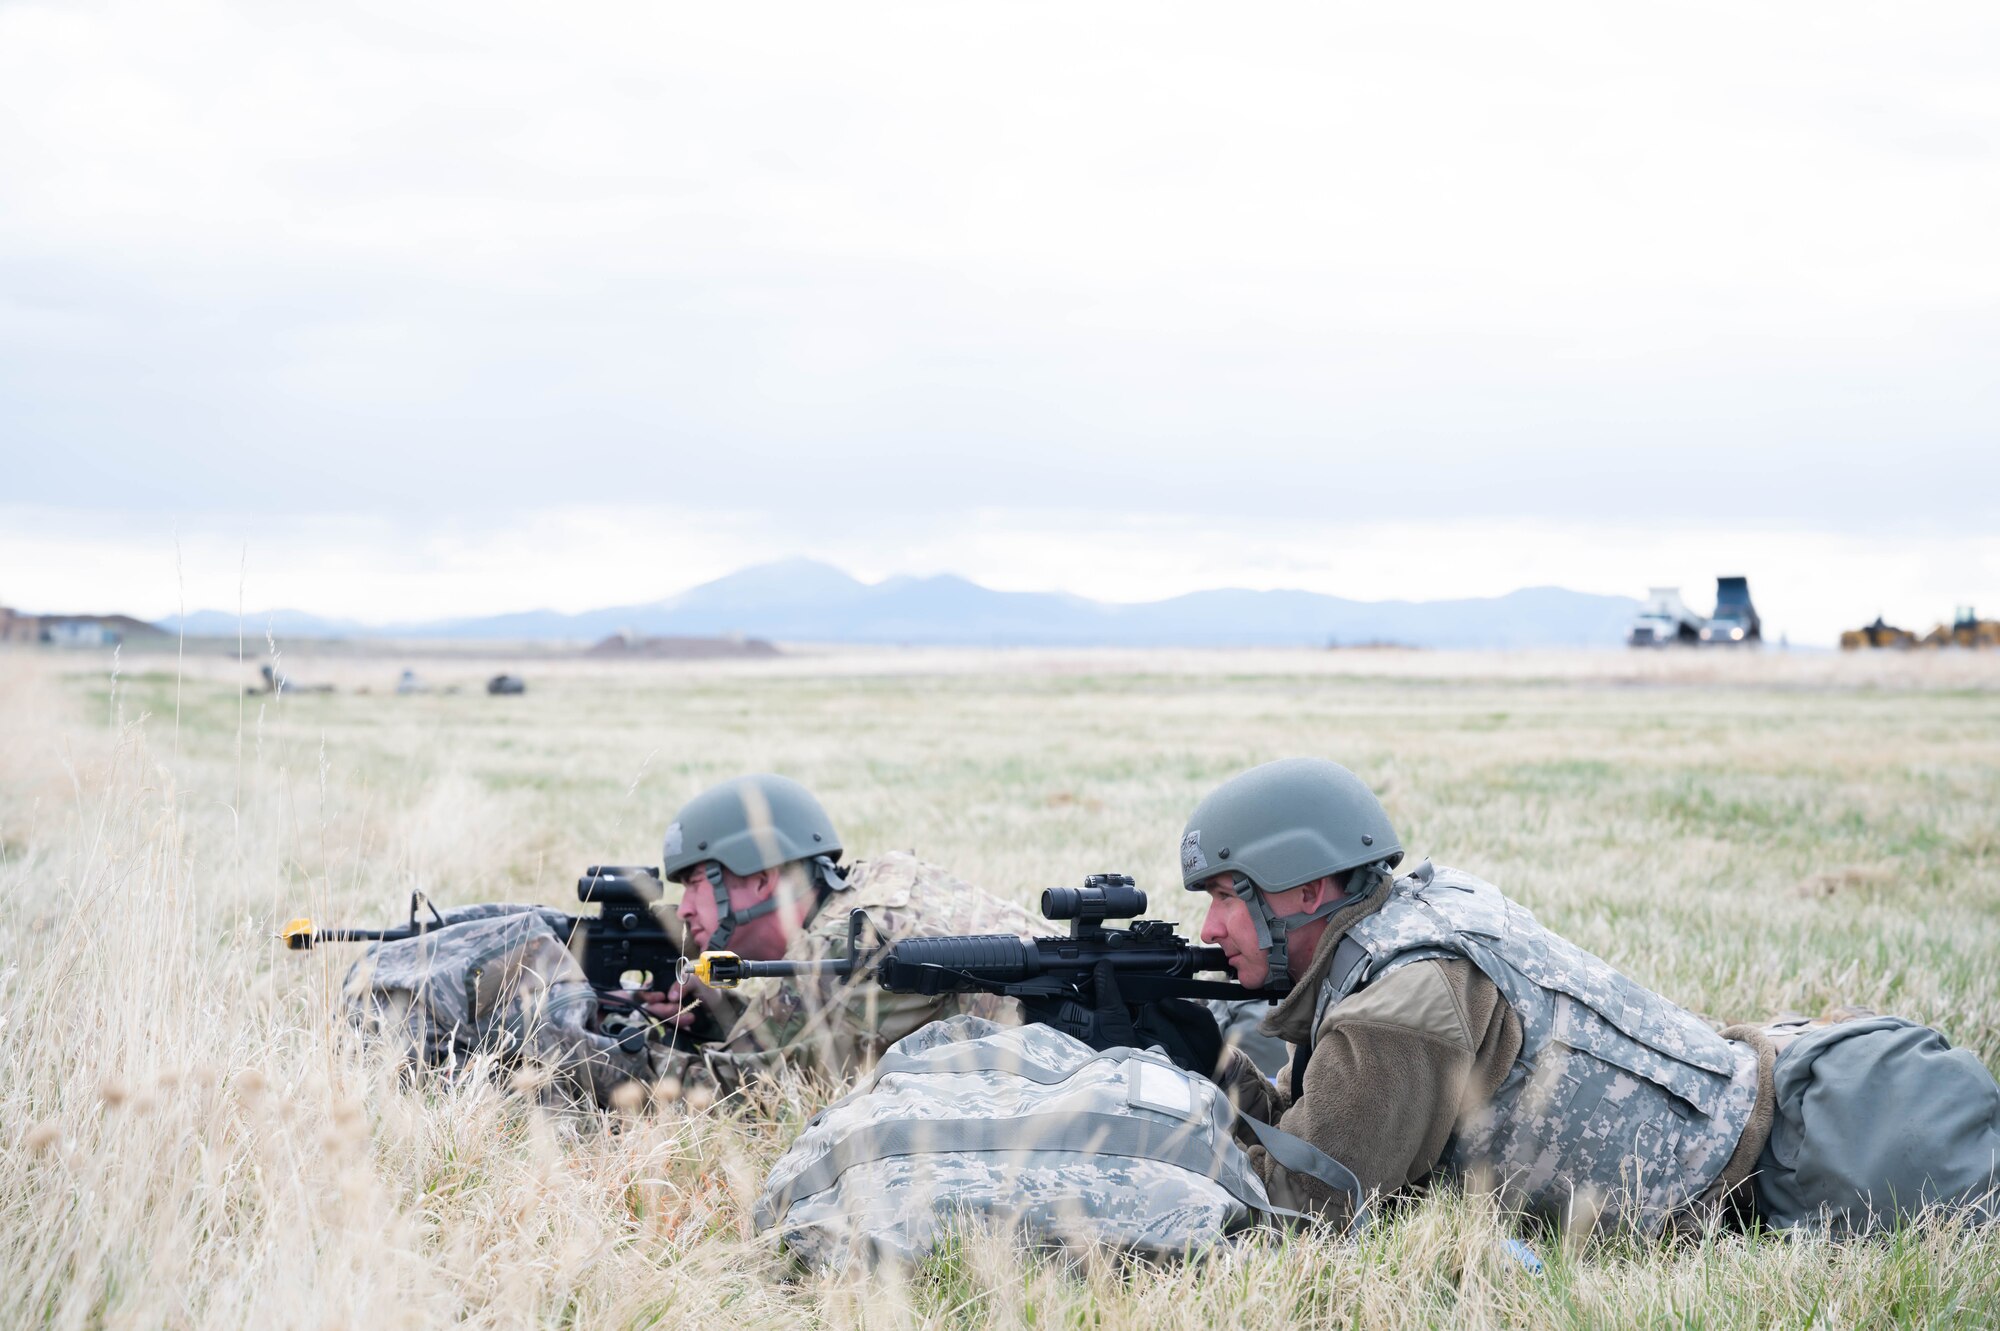 Senior Airman Terry Pittman and Airman Thomas Snow, 819th RED HORSE SQUADRON water and fuels system maintenance technicians, perform perimeter security during an exercise May 4, 2021, at Malmstrom Air Force Base, Mont.